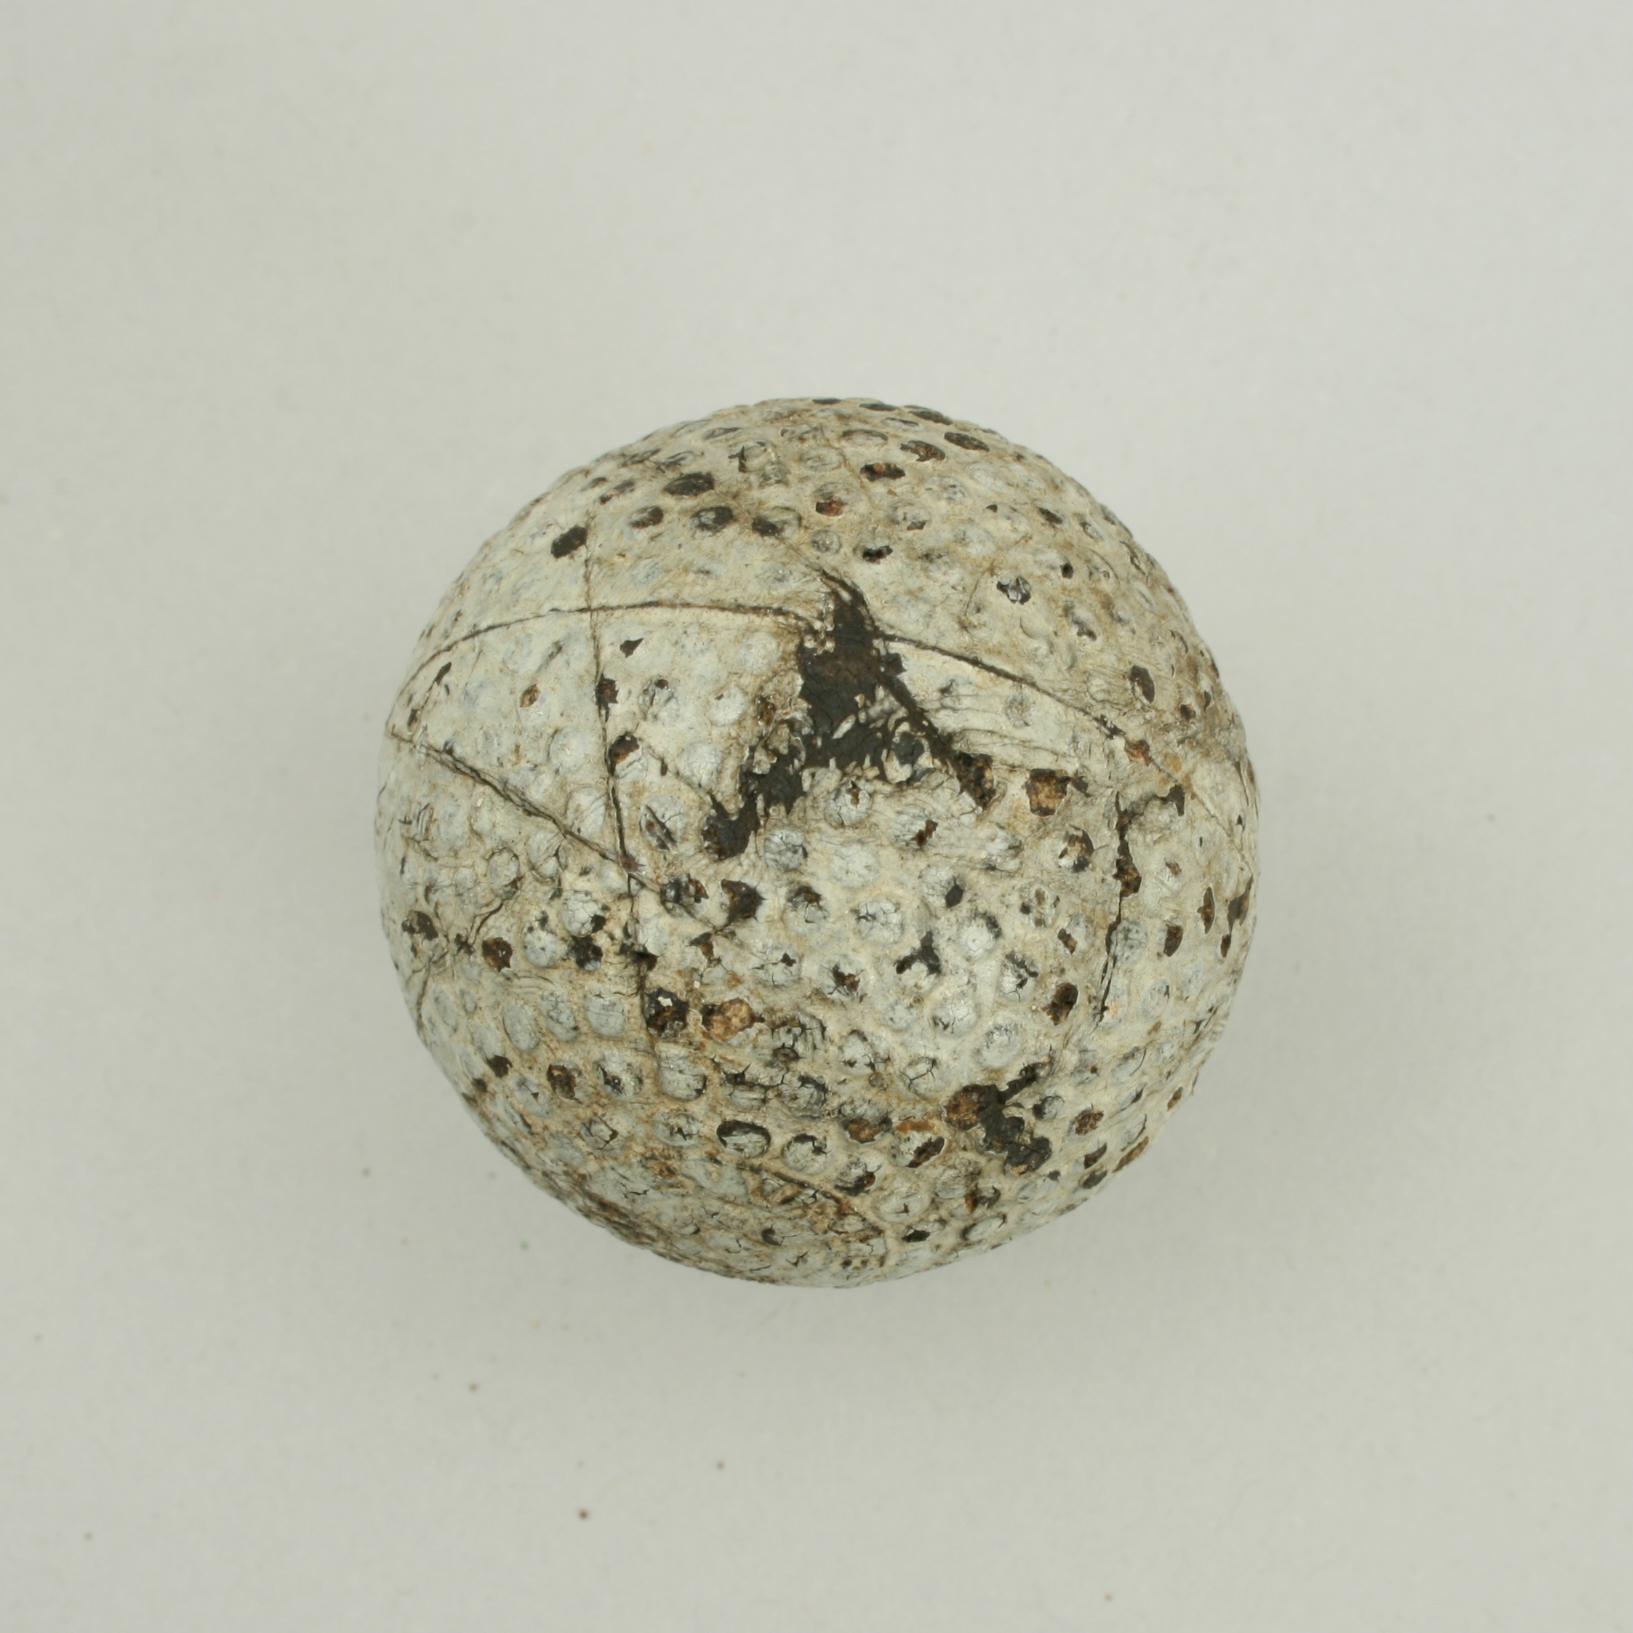 'S.Vale Hawk' Bramble Golf Ball.
A good example of a ' Springvale Hawk' bramble patterned rubber core golf ball. The golf ball is in fair condition and is manufactured by Hutchison Main & Co., Glasgow Scotland, circa 1900. The ball is marked 'S.